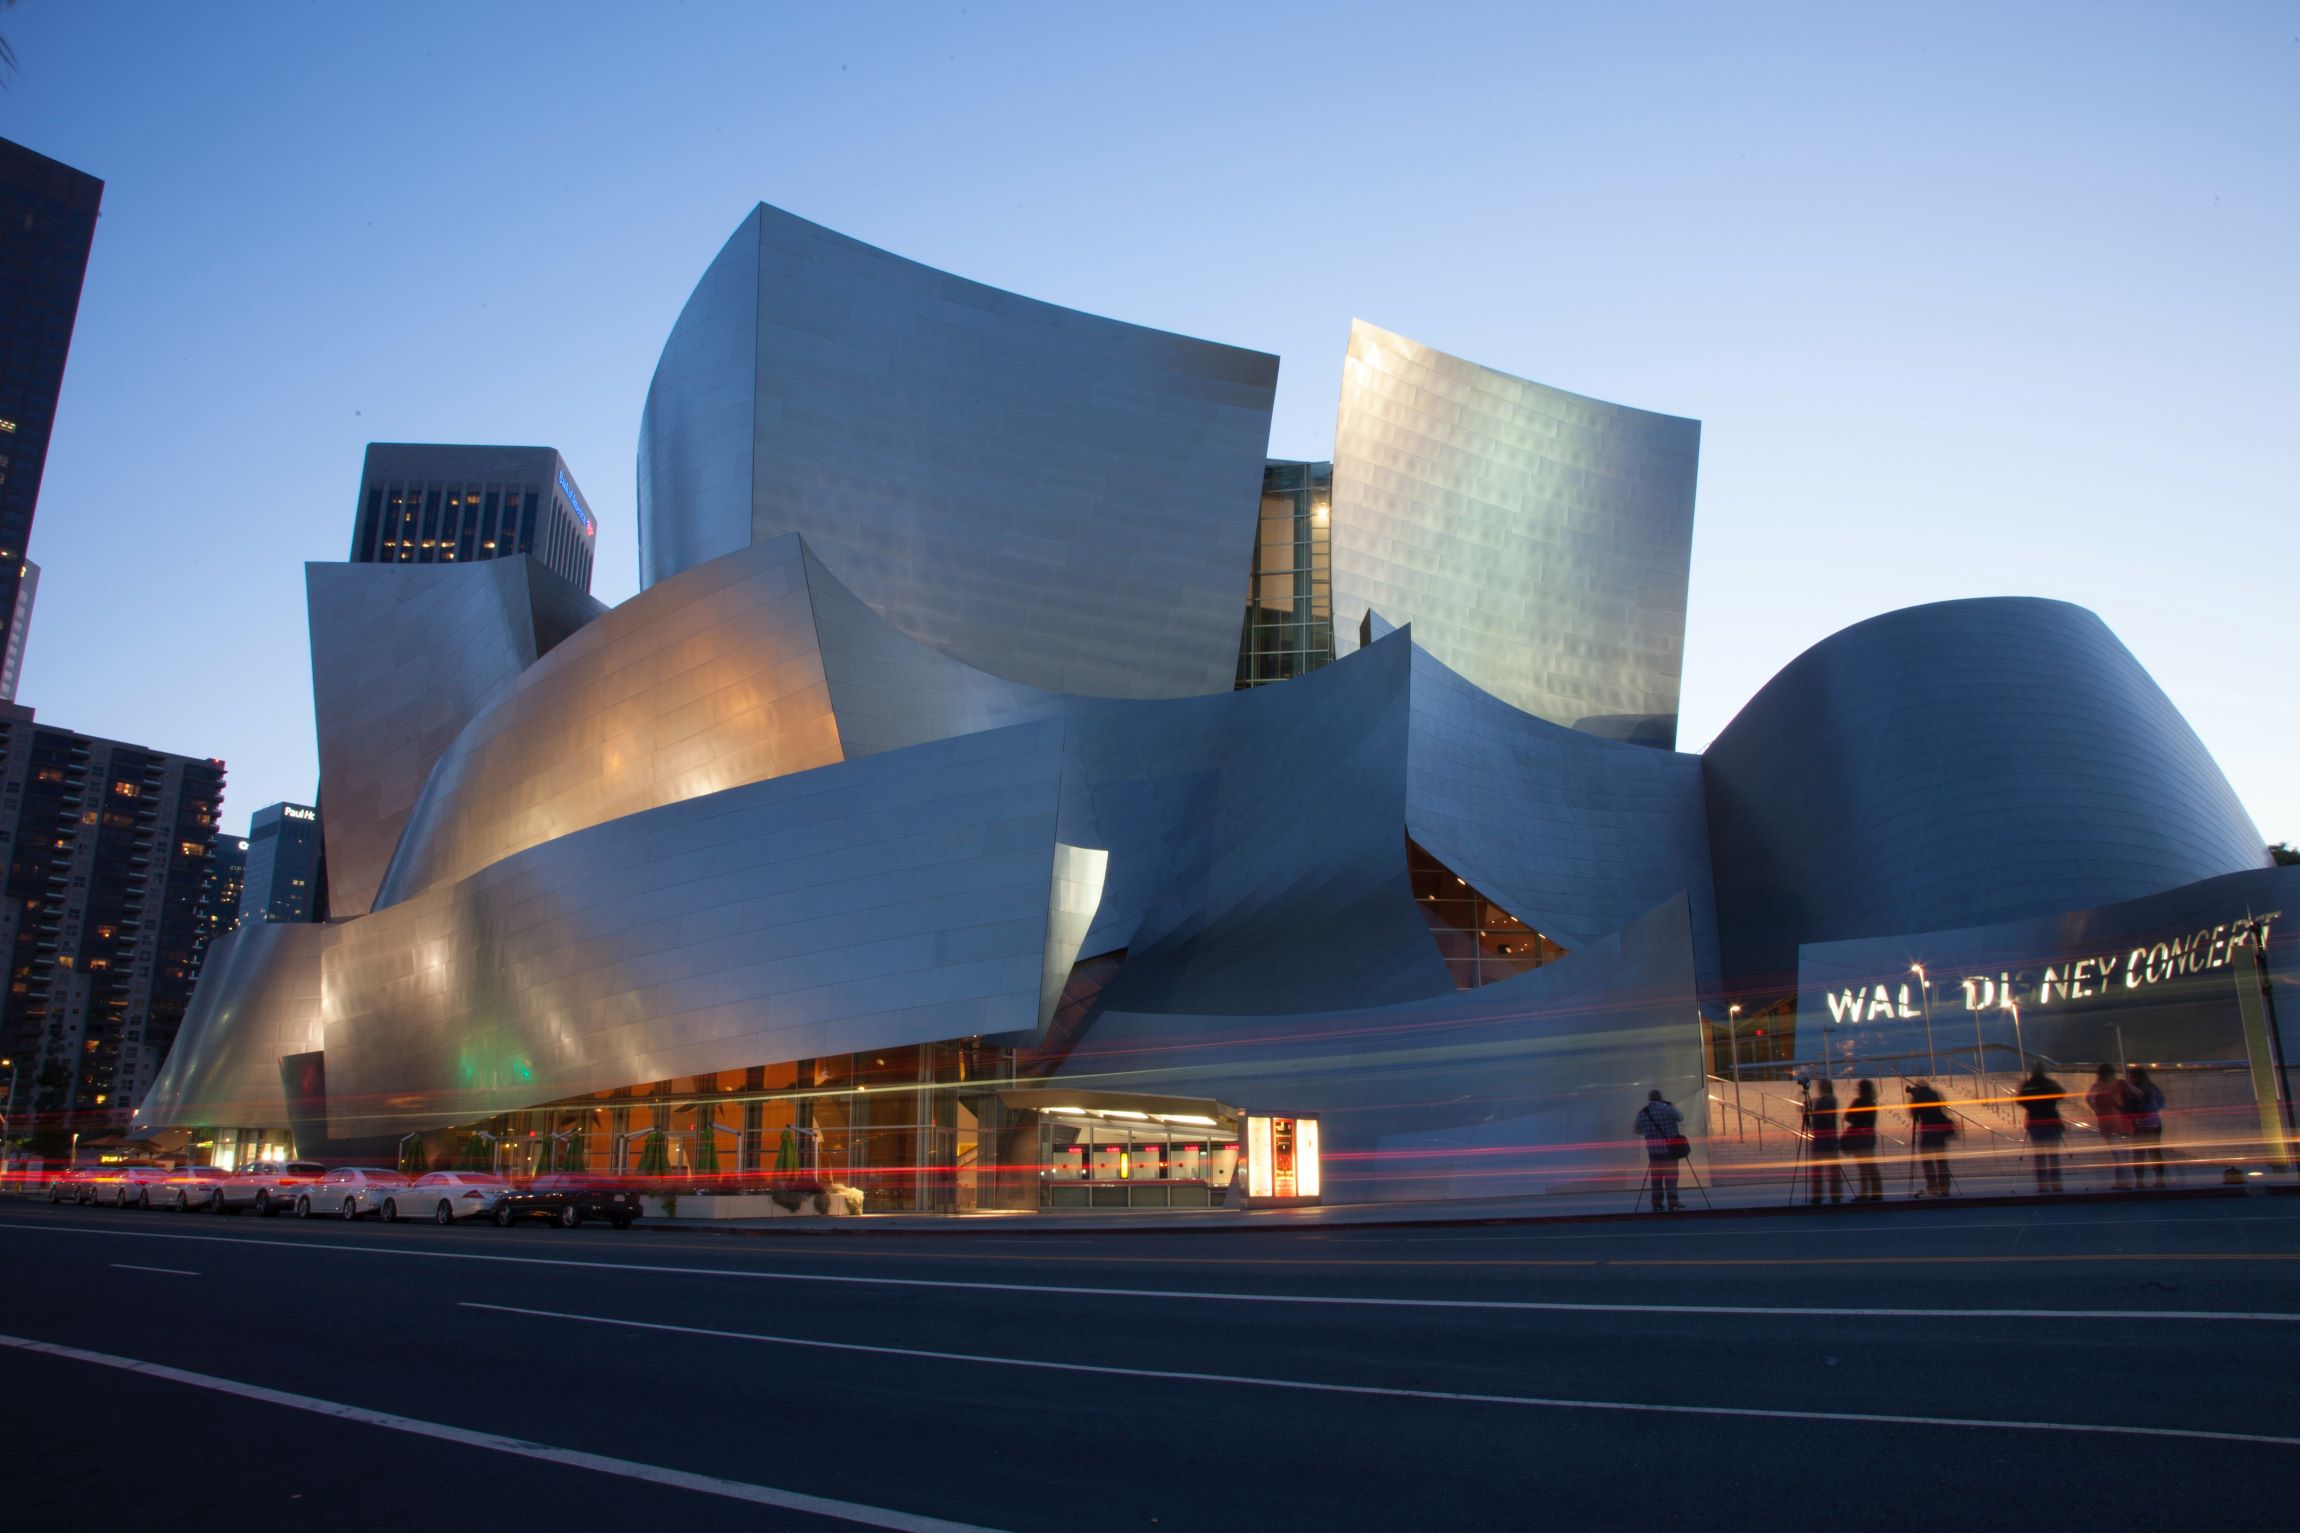 An image of the Walt Disney Concert Hall, the setting of the live performance of the film Psycho.